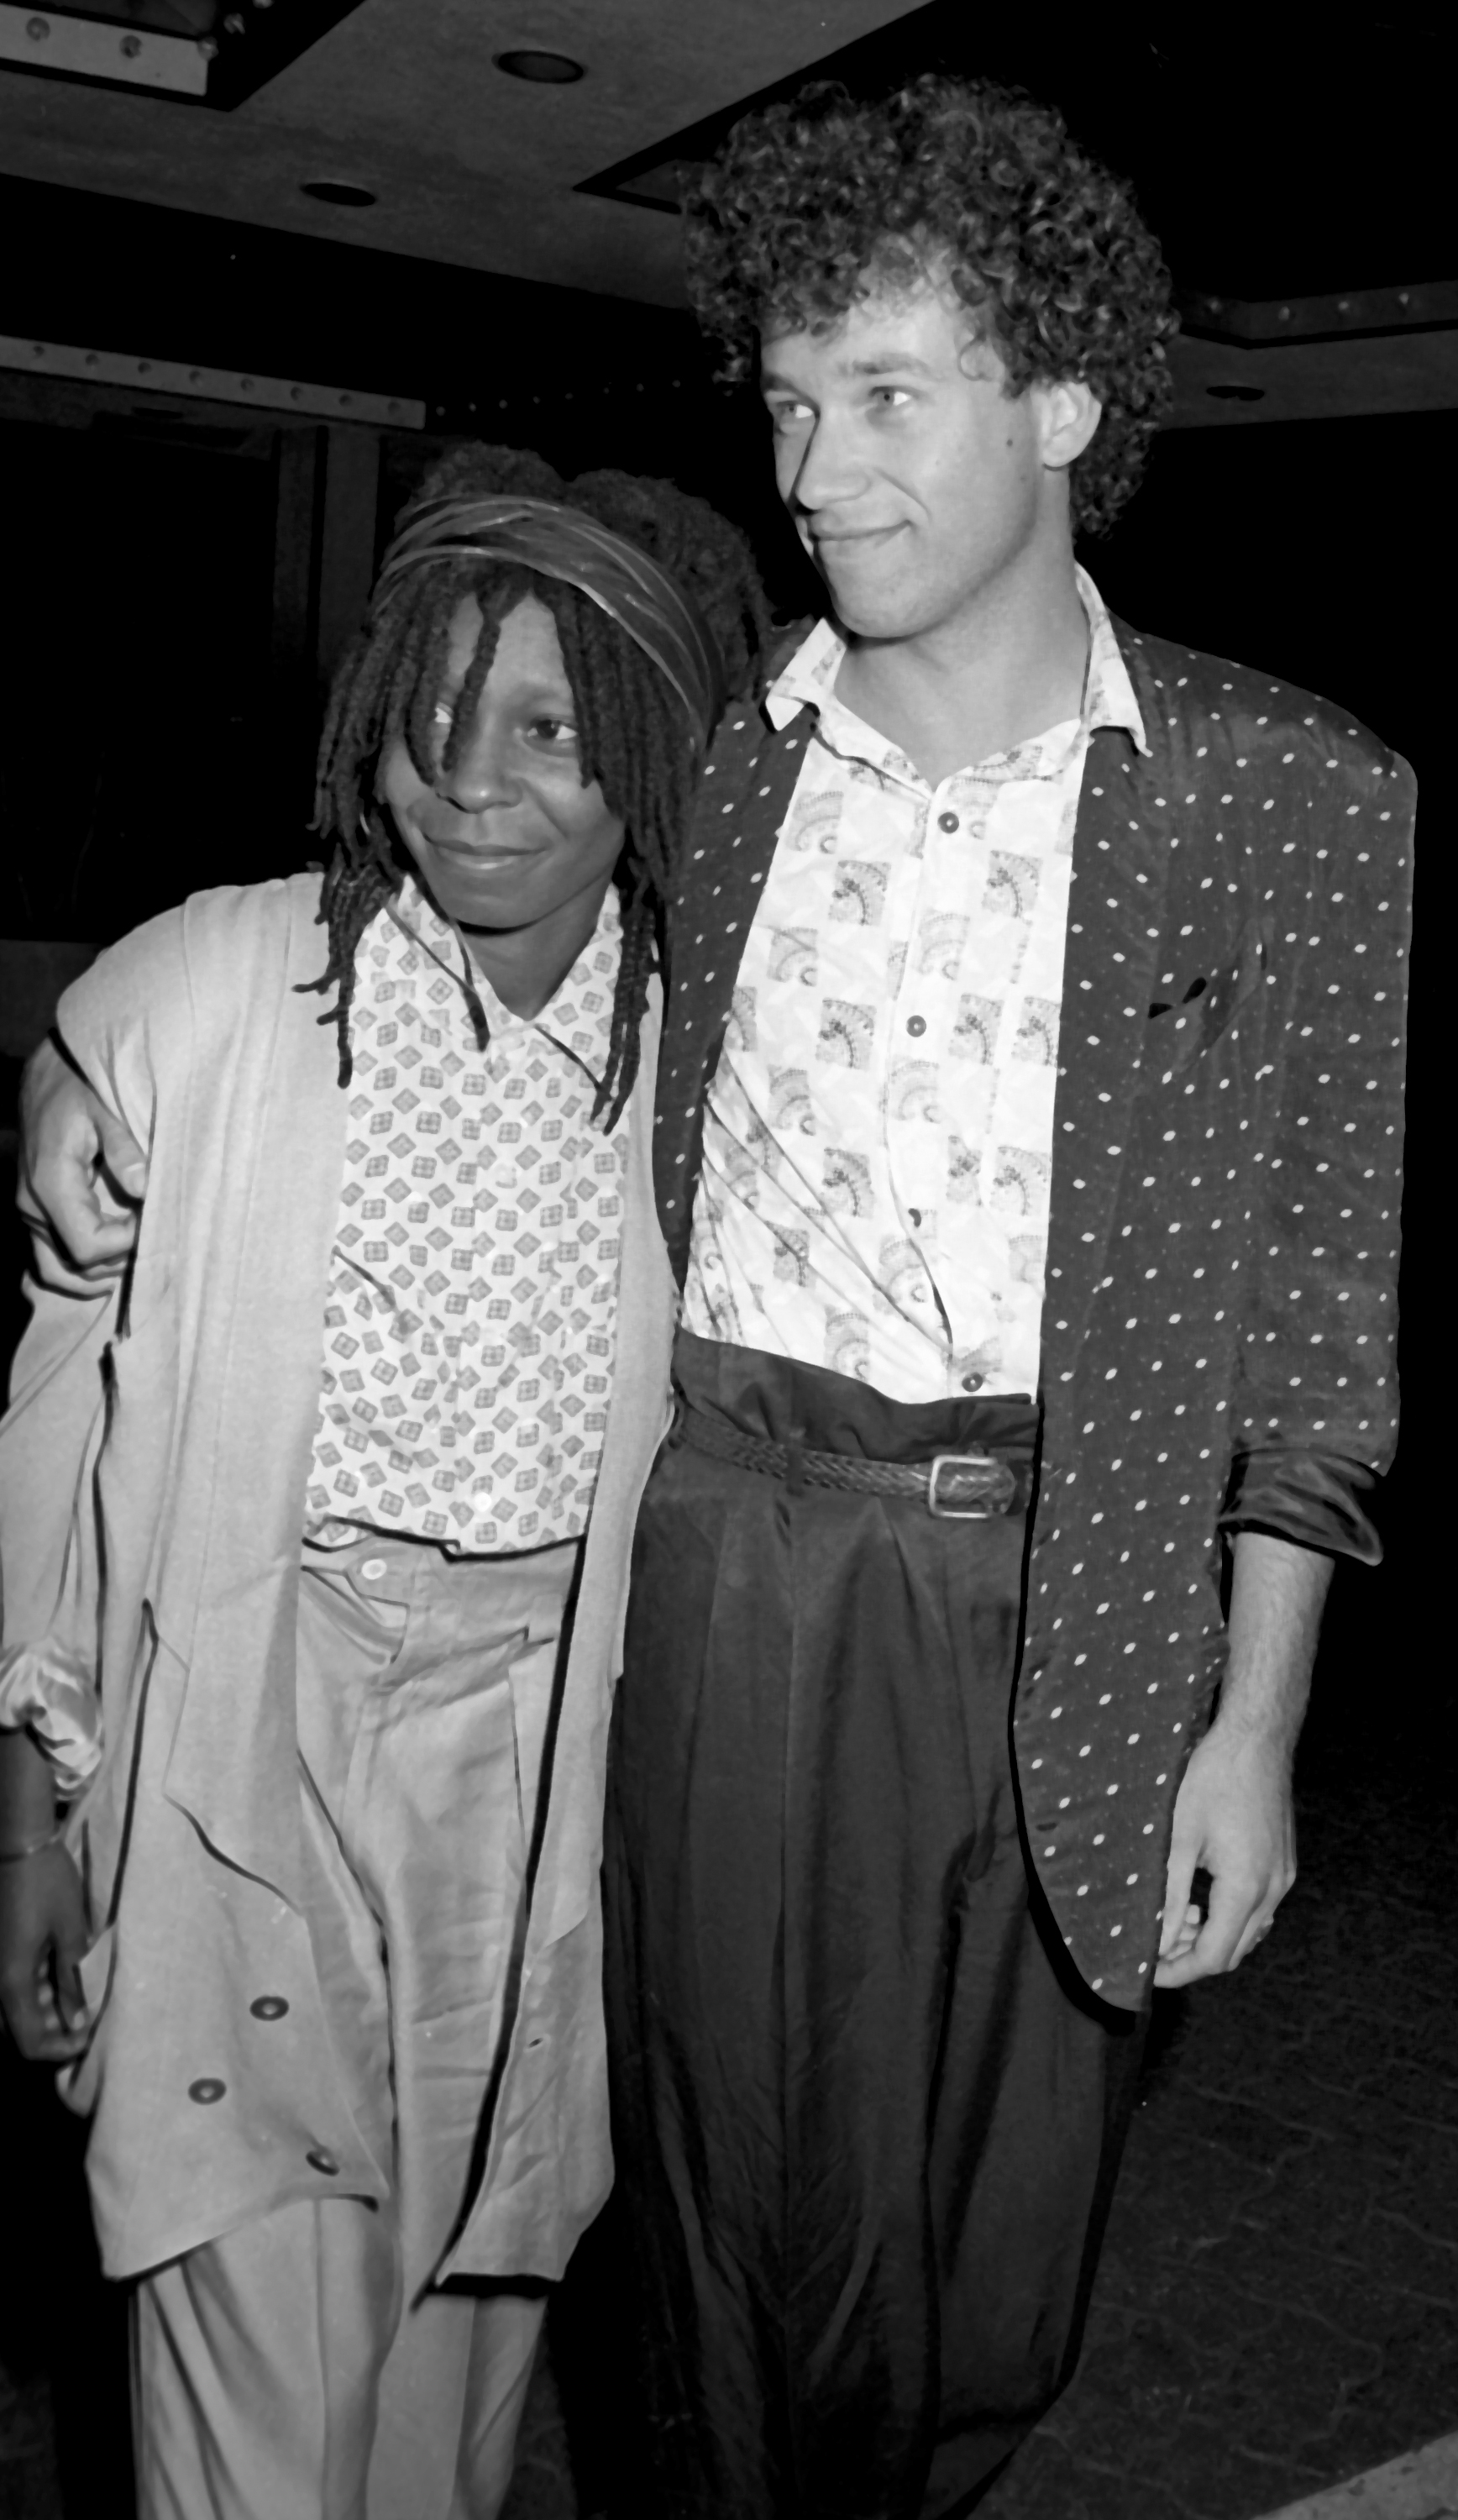 Whoopi Goldberg Got Married 'To Feel Normal' and Was Never Really in ...